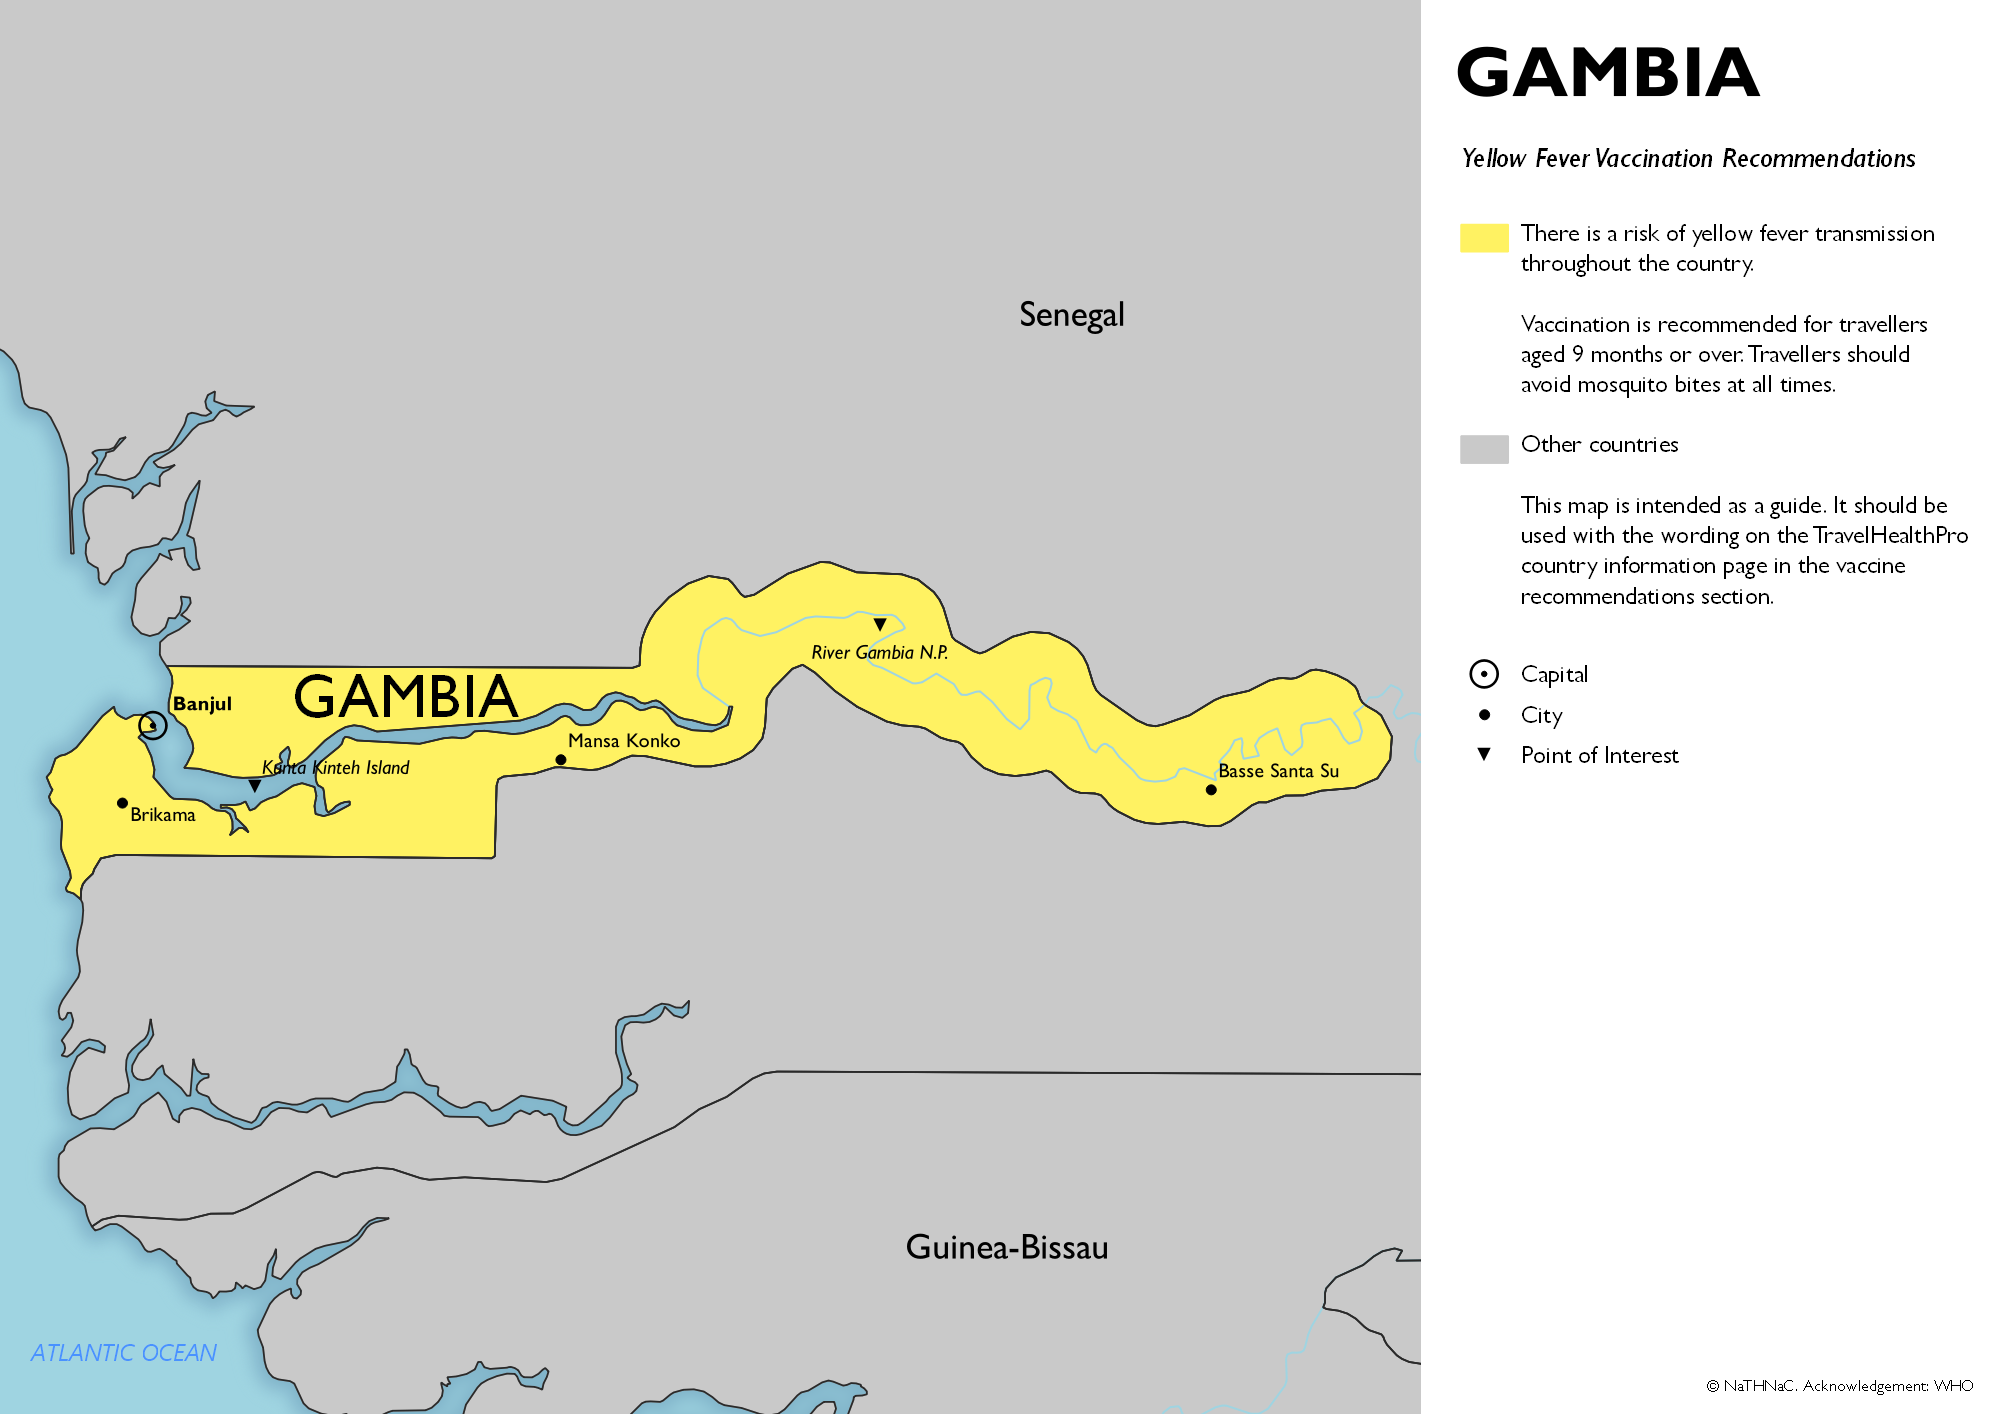 Yellow fever vaccine recommendation map for The Gambia